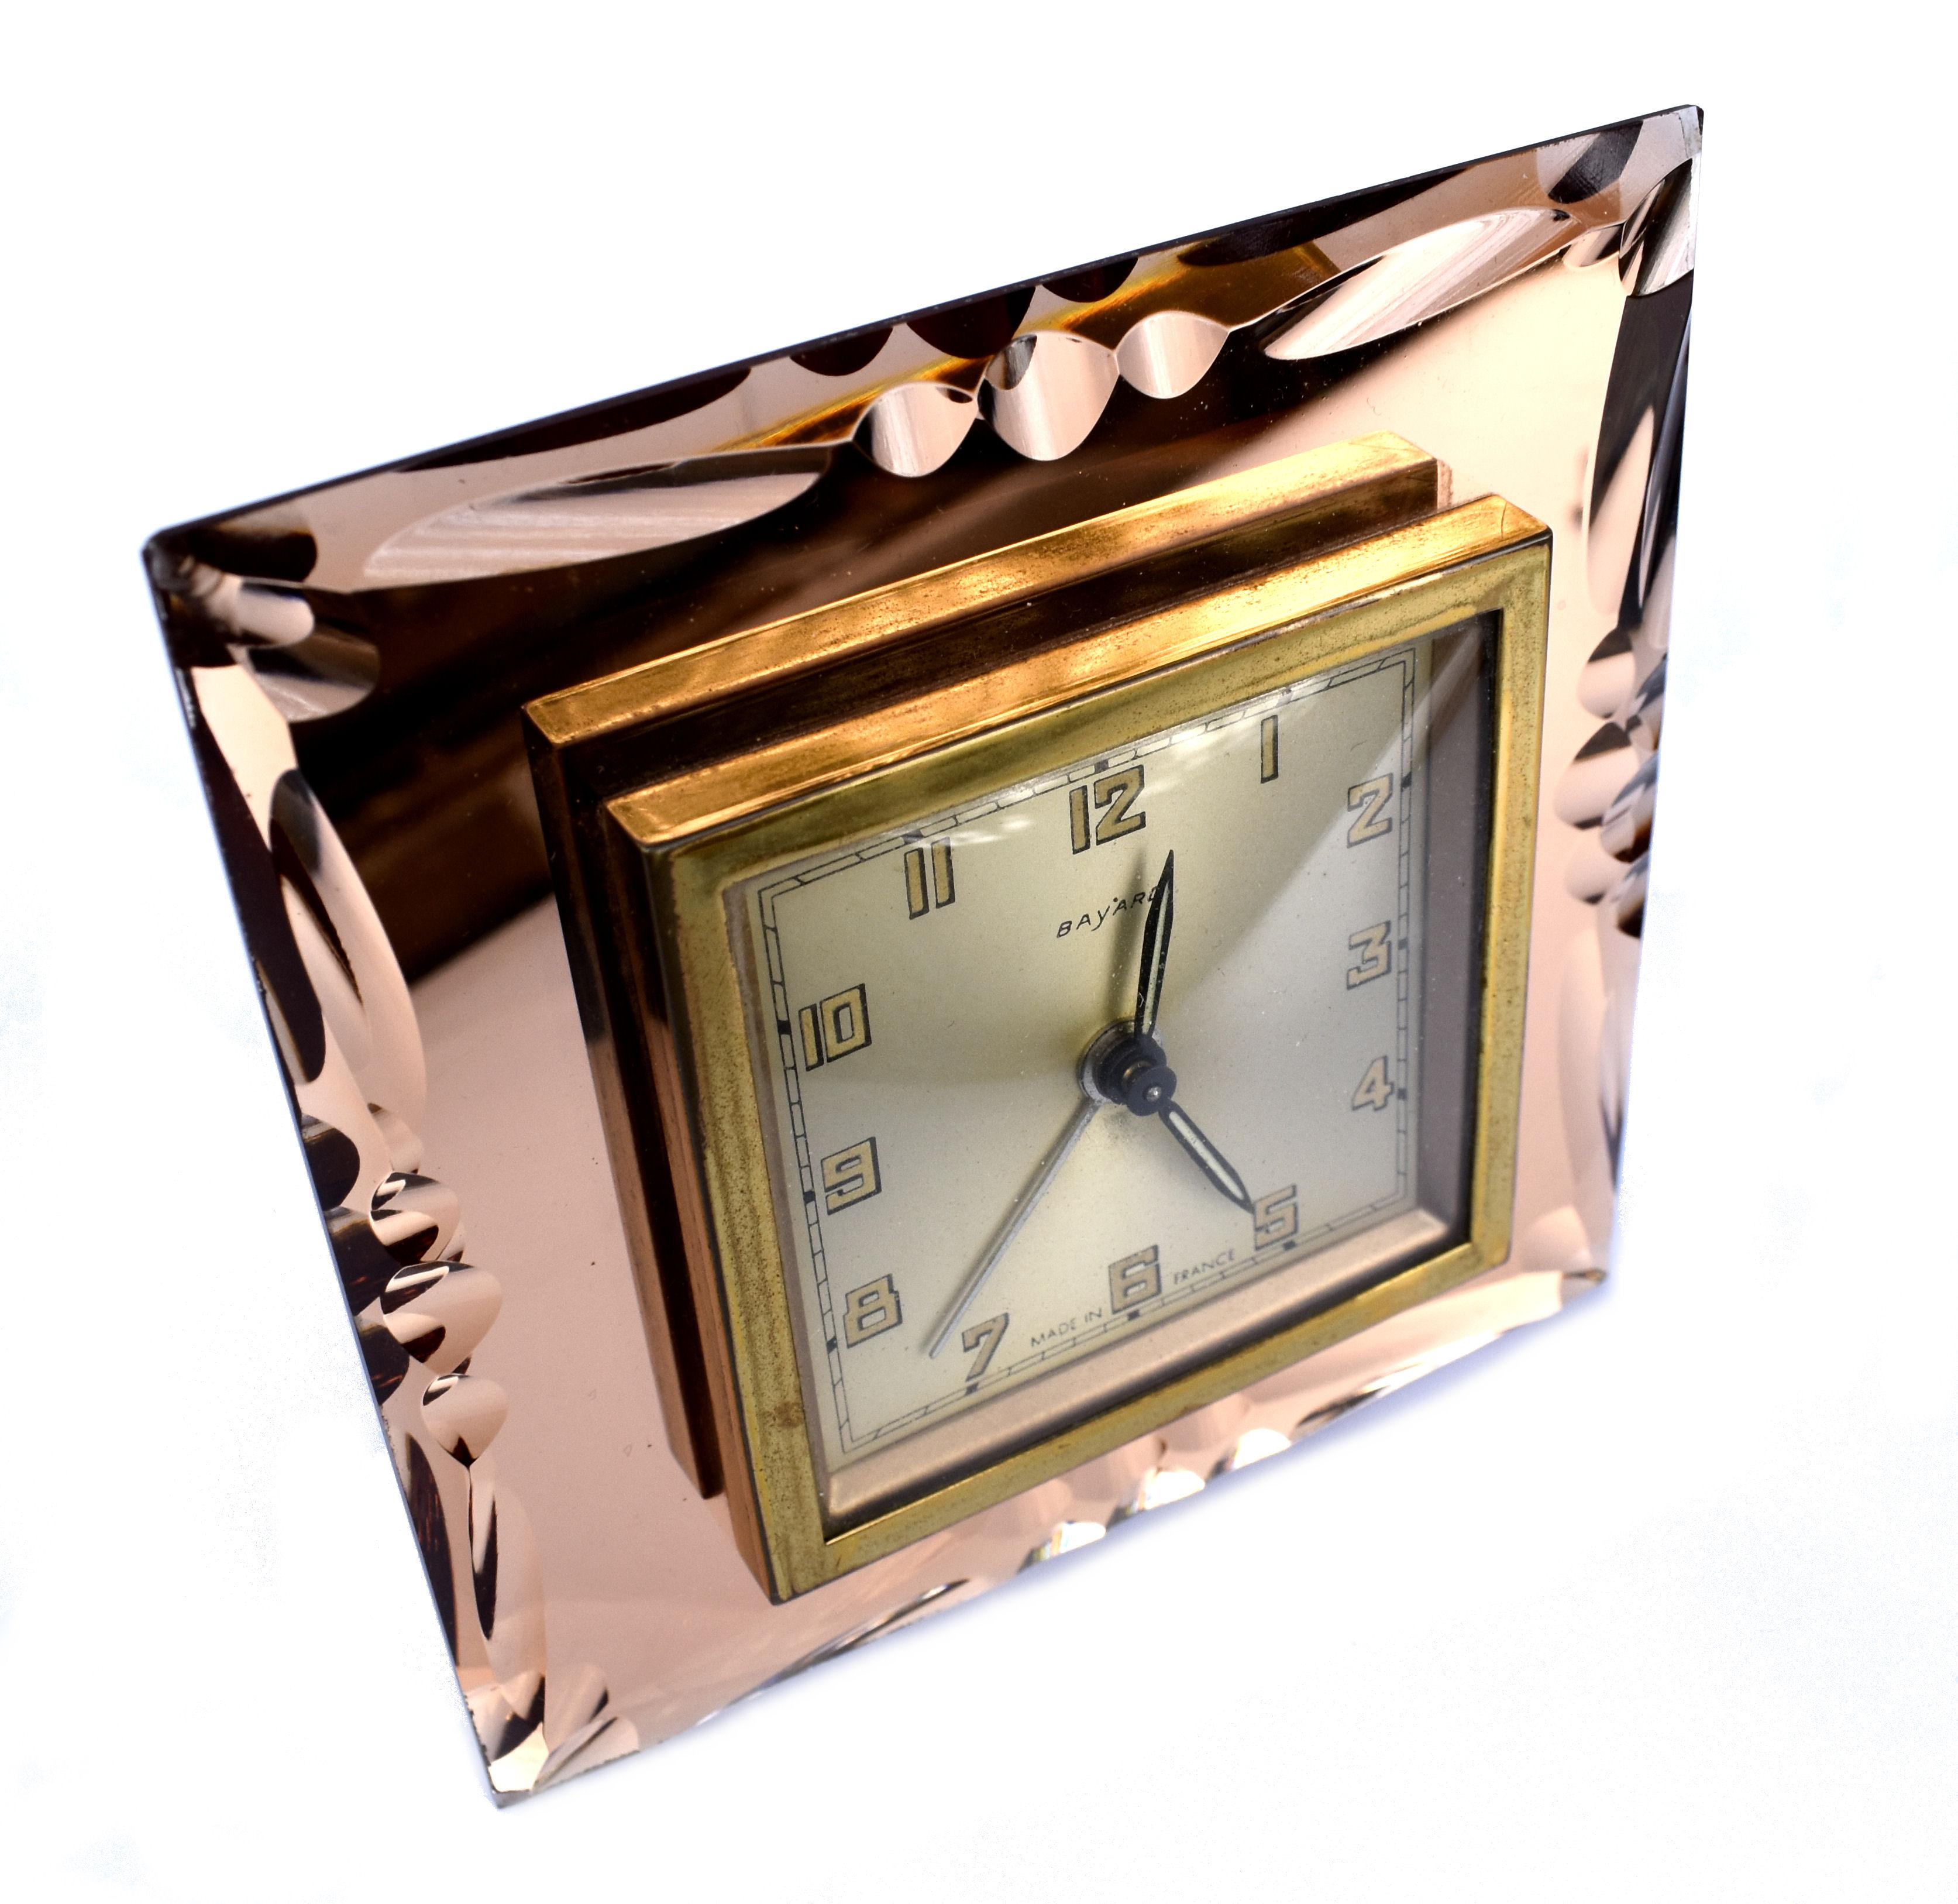 If you love glam as we do then this is the piece for you. For your consideration 1930's Art Deco French mirror clock made by Bayard the French clock makers. The front is complete peach coloured mirror with bevelled edges and etched design. It's free